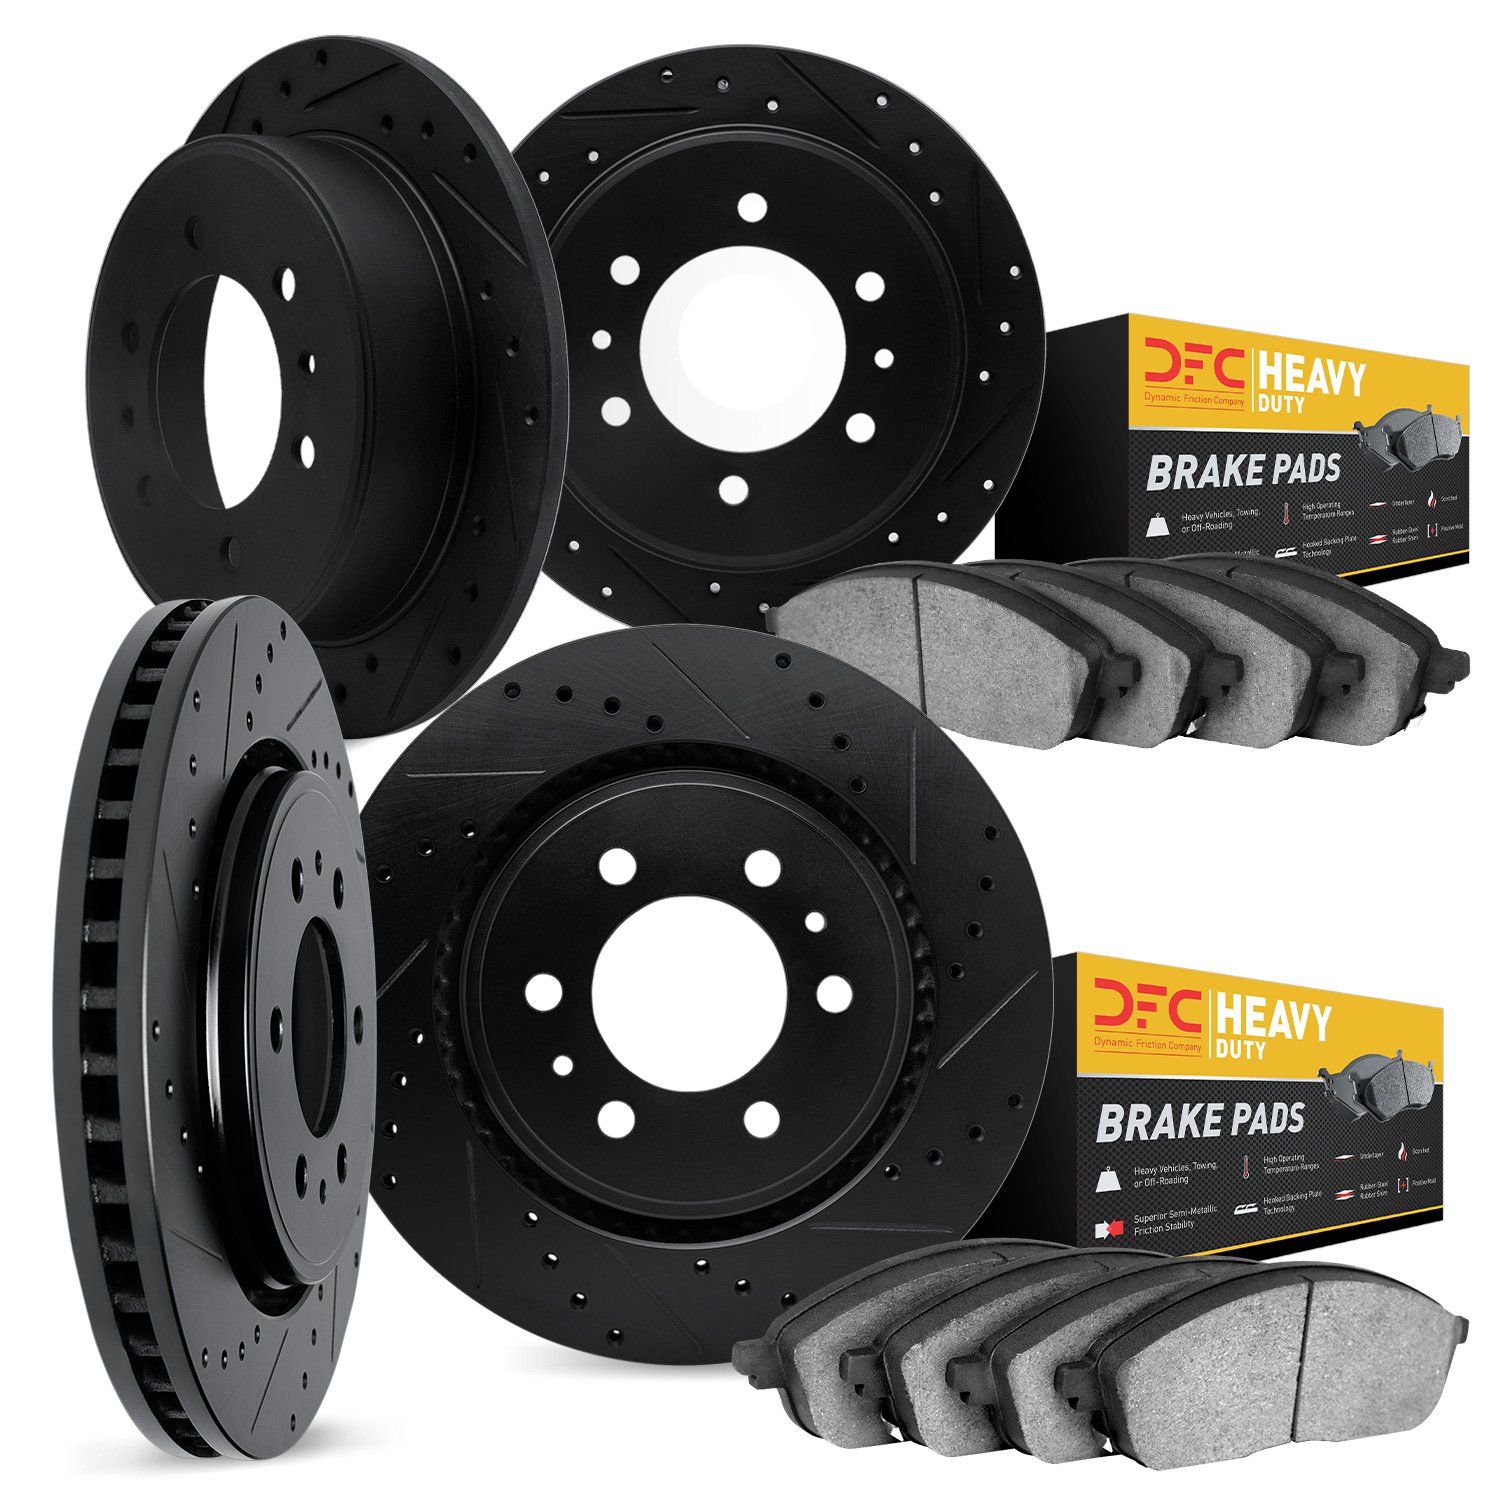 7204-40216 Drilled/Slotted Rotors w/Heavy-Duty Brake Pads Kit [Silver], Fits Select Multiple Makes/Models, Position: Front and R